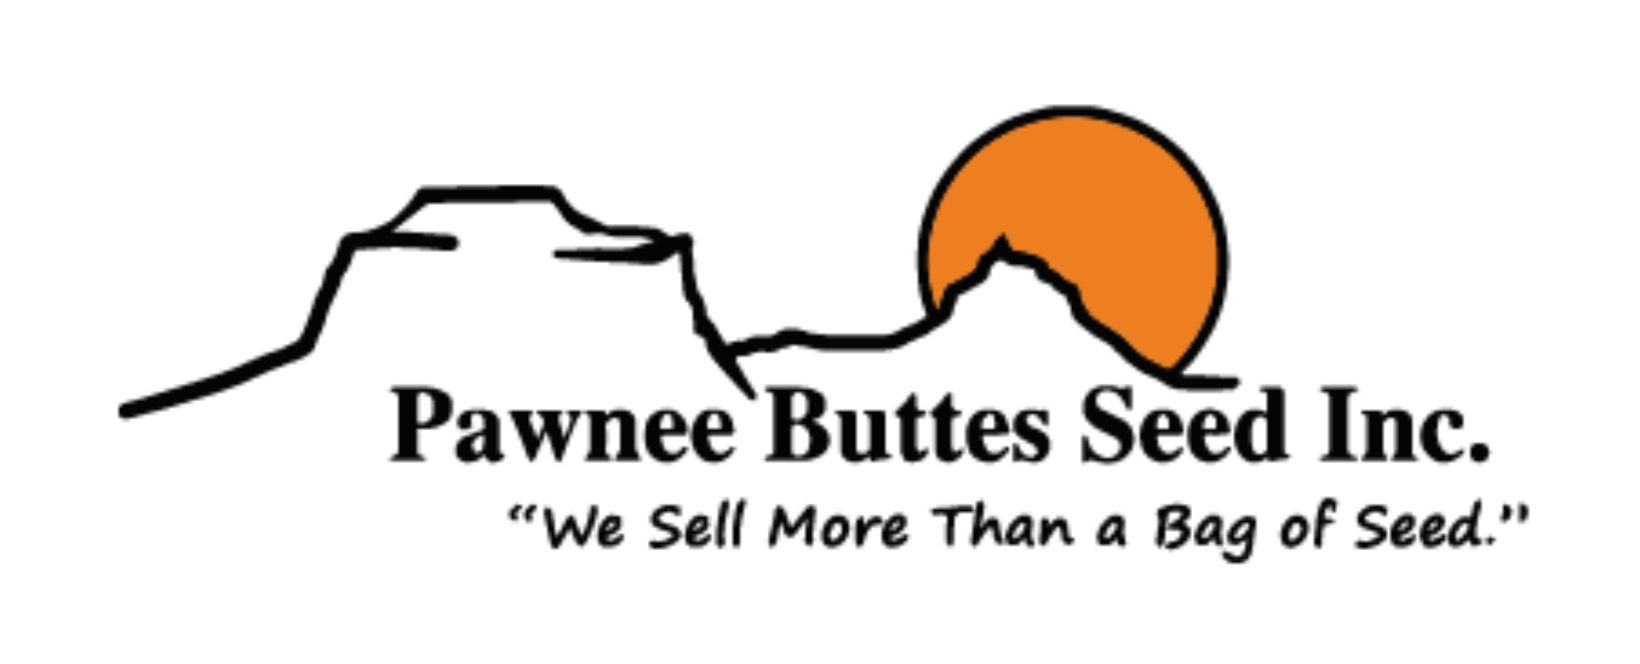 Pawnee Buttes Seed | The Right Seed for Your Needs